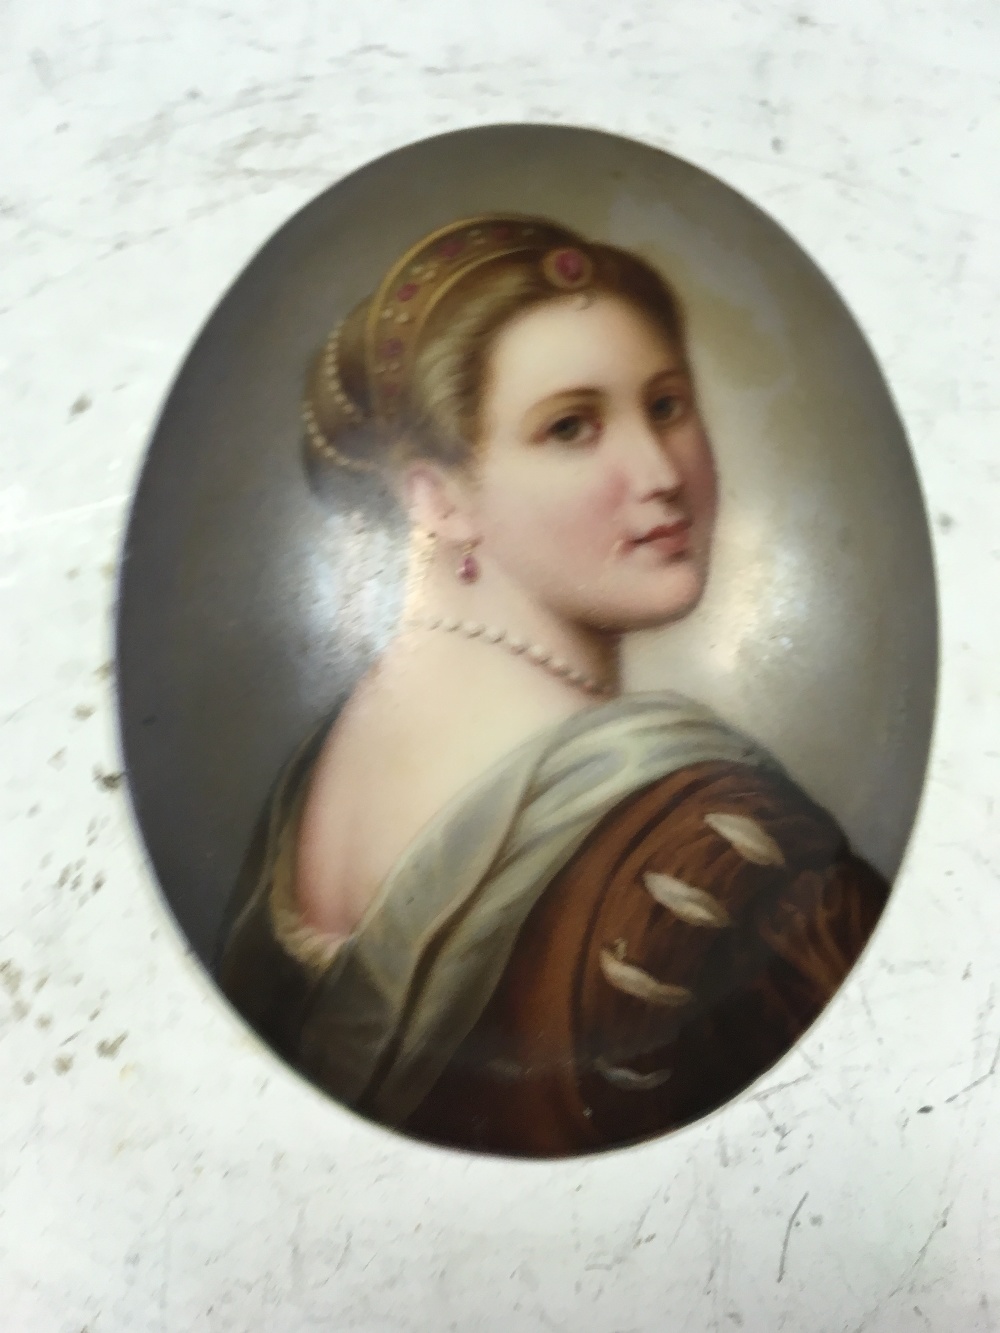 Two 19th century porcelain oval portrait plaques, one painted with a noblewoman with jewelled - Image 5 of 5